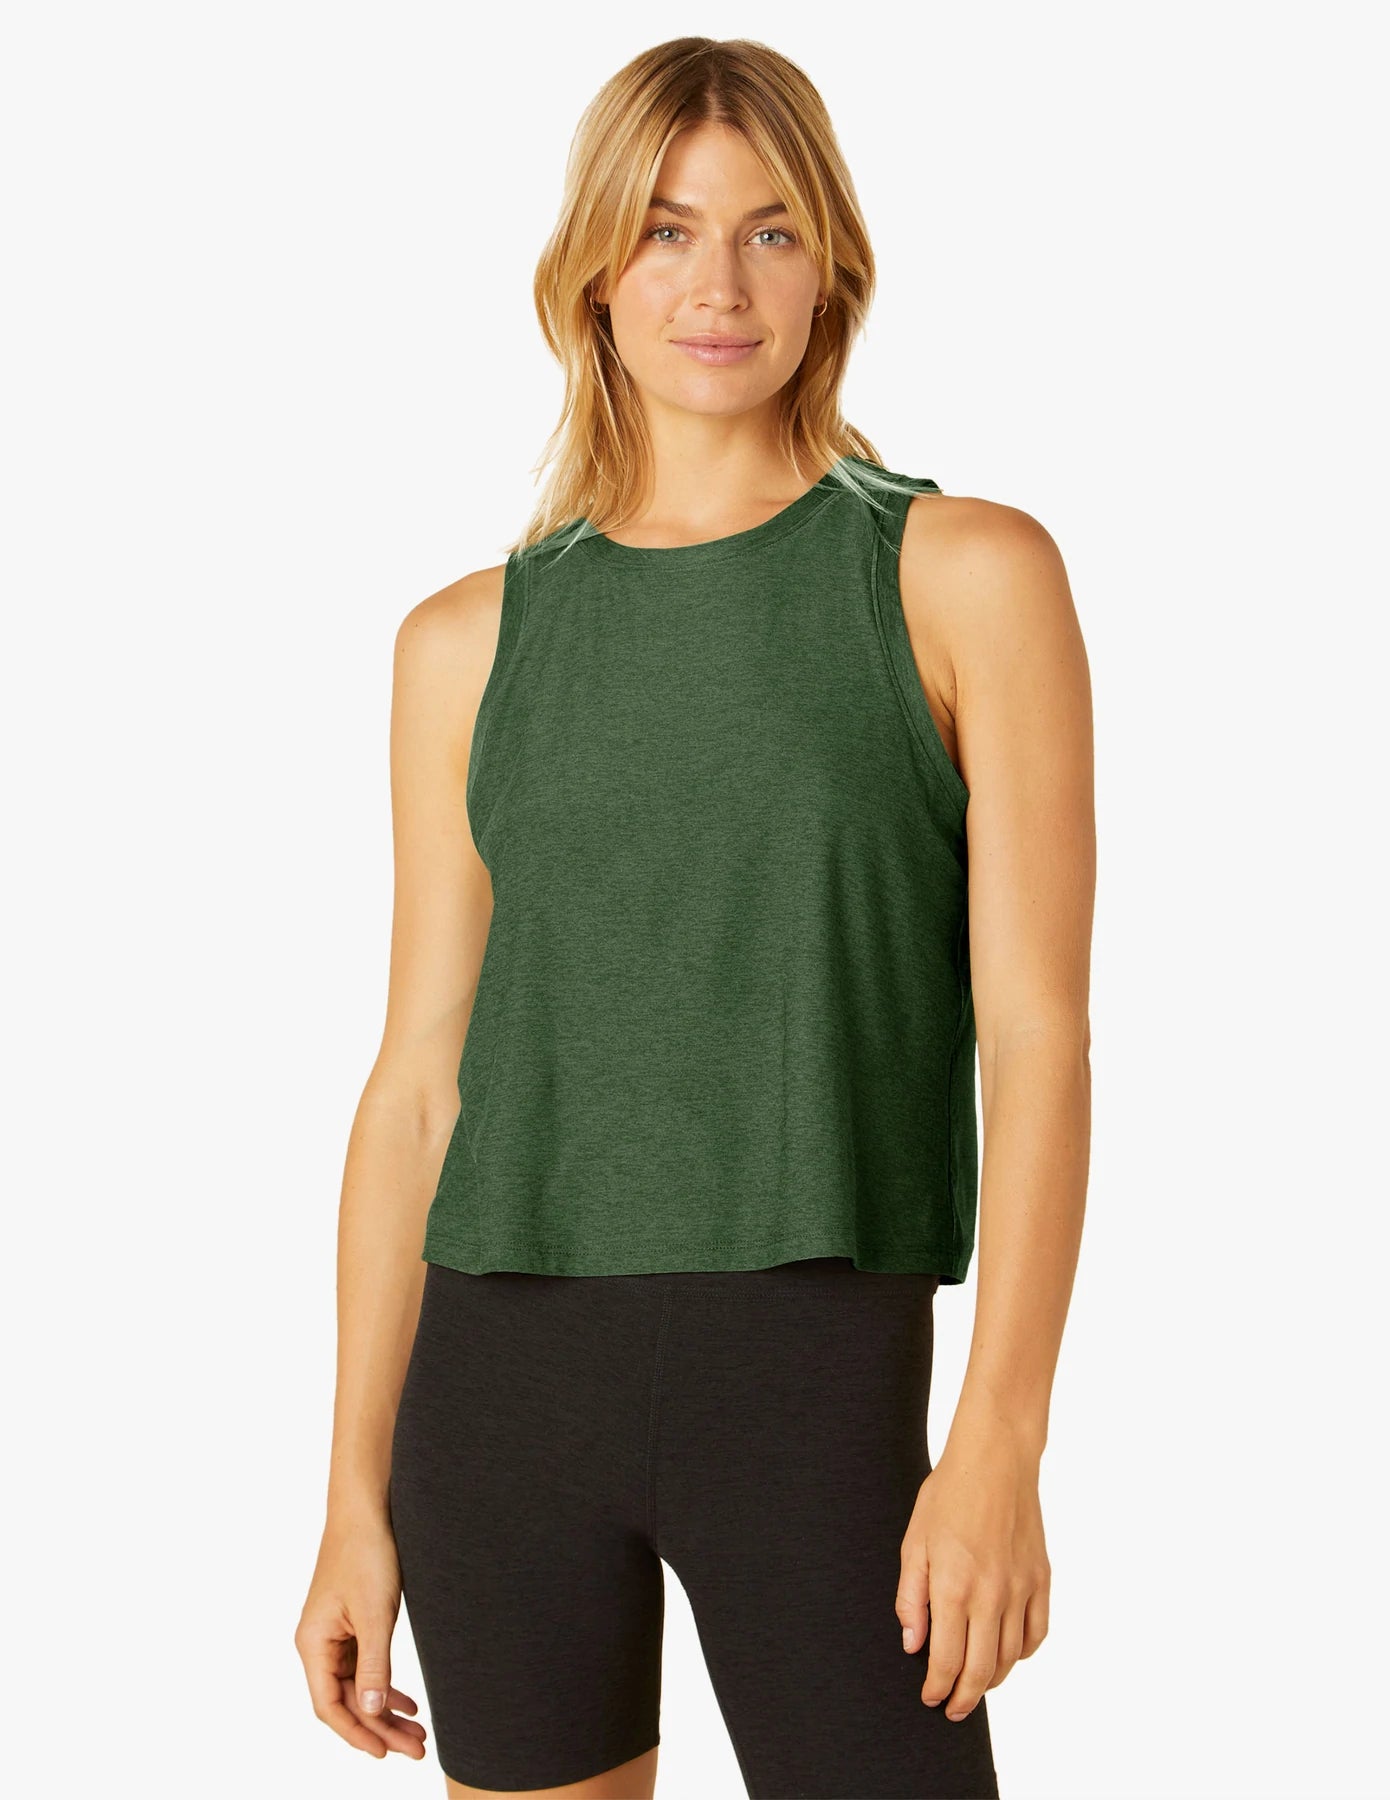 Clearance, Maly Ladies Breezy Practice Top MF201101